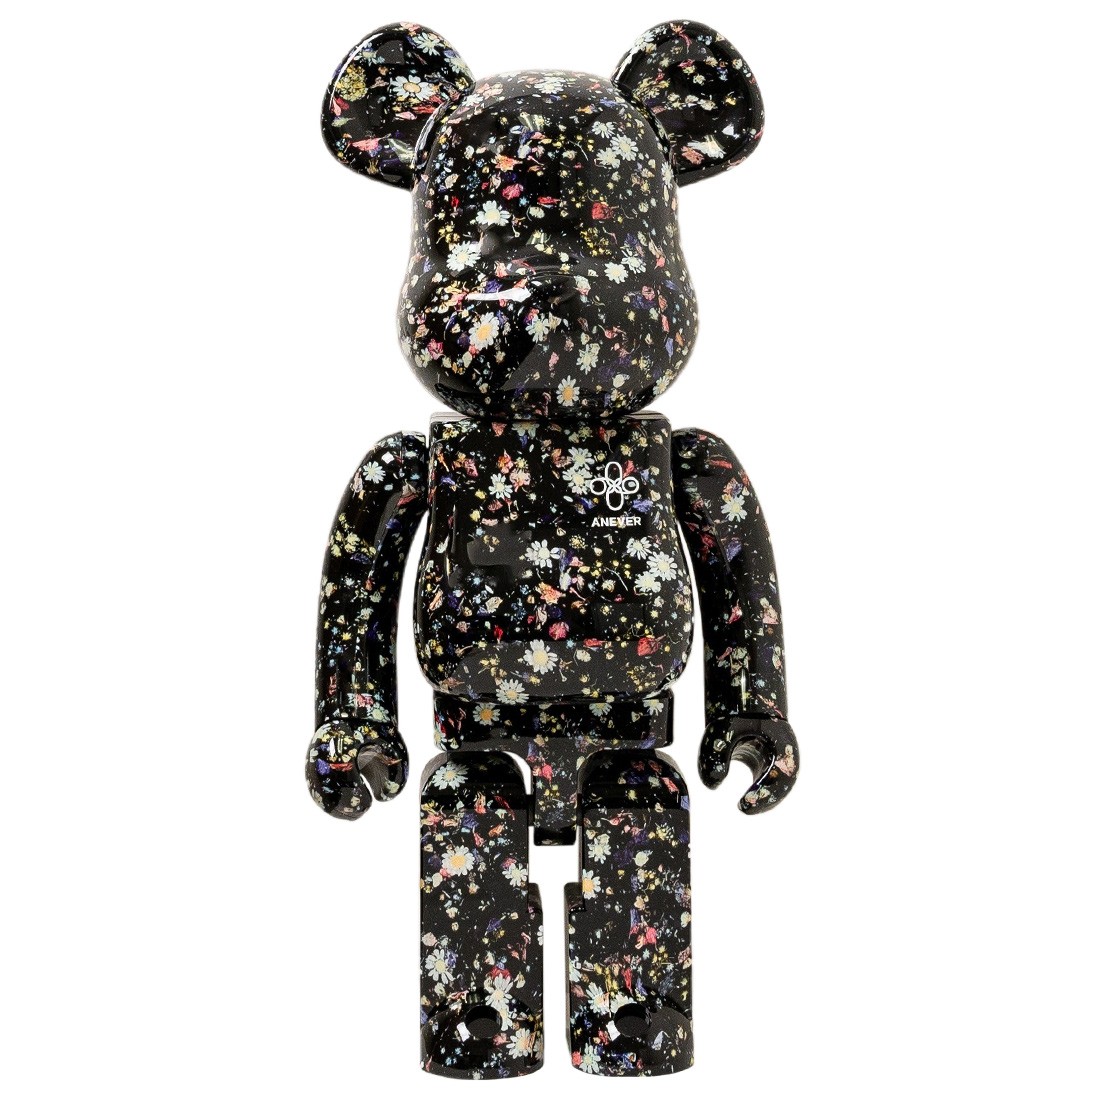 BE@RBRICK ANEVER 1000% www.legacypersonnelsolutions.com